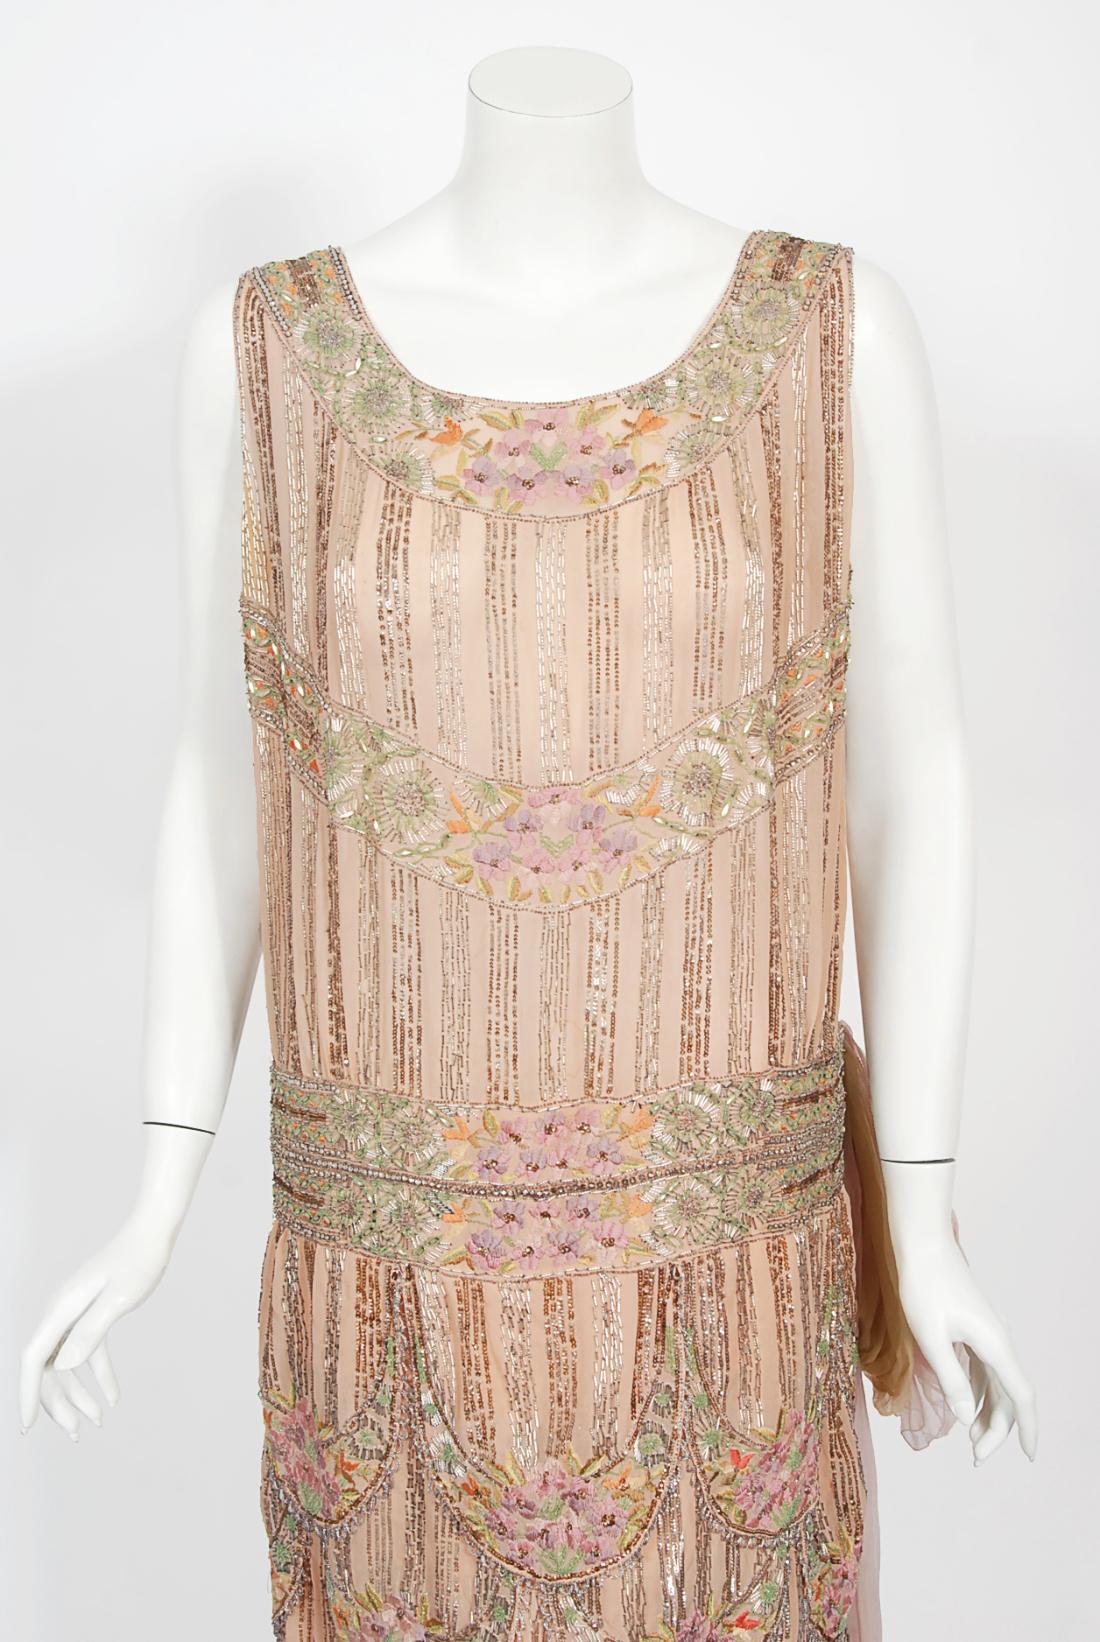 There are lots of lovely antique garments still in existence, but every once in a while I come across one that stops me dead in my tracks. This is an extraordinarily beautiful and exceptional 1920's French couture museum quality blush pink